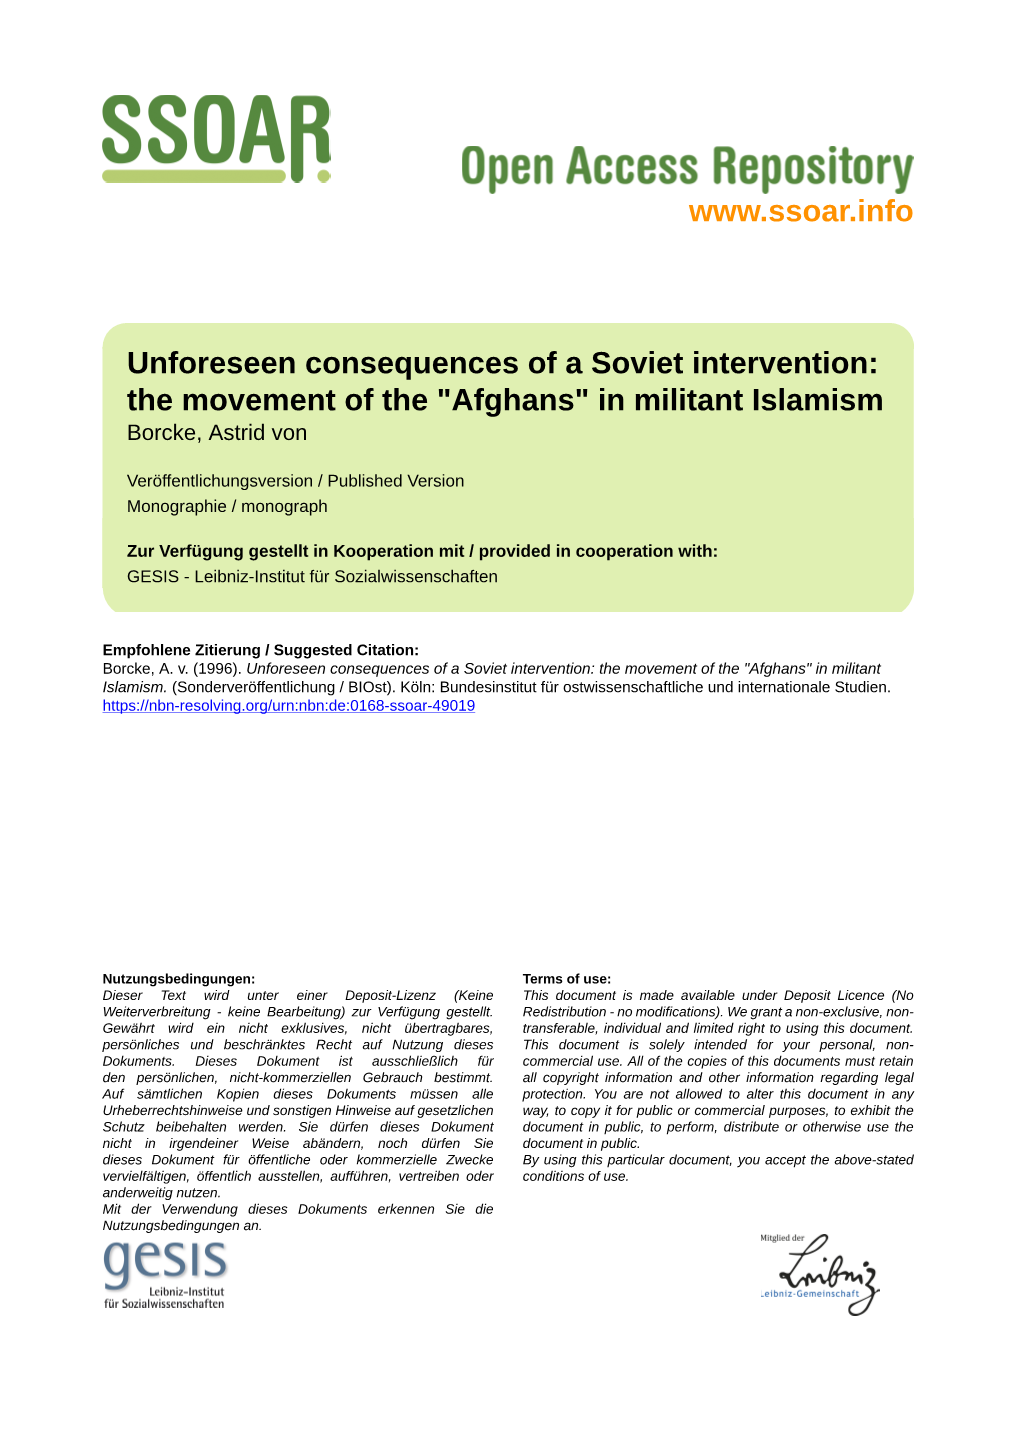 Unforeseen Consequences of a Soviet Intervention: the Movement of the "Afghans" in Militant Islamism Borcke, Astrid Von